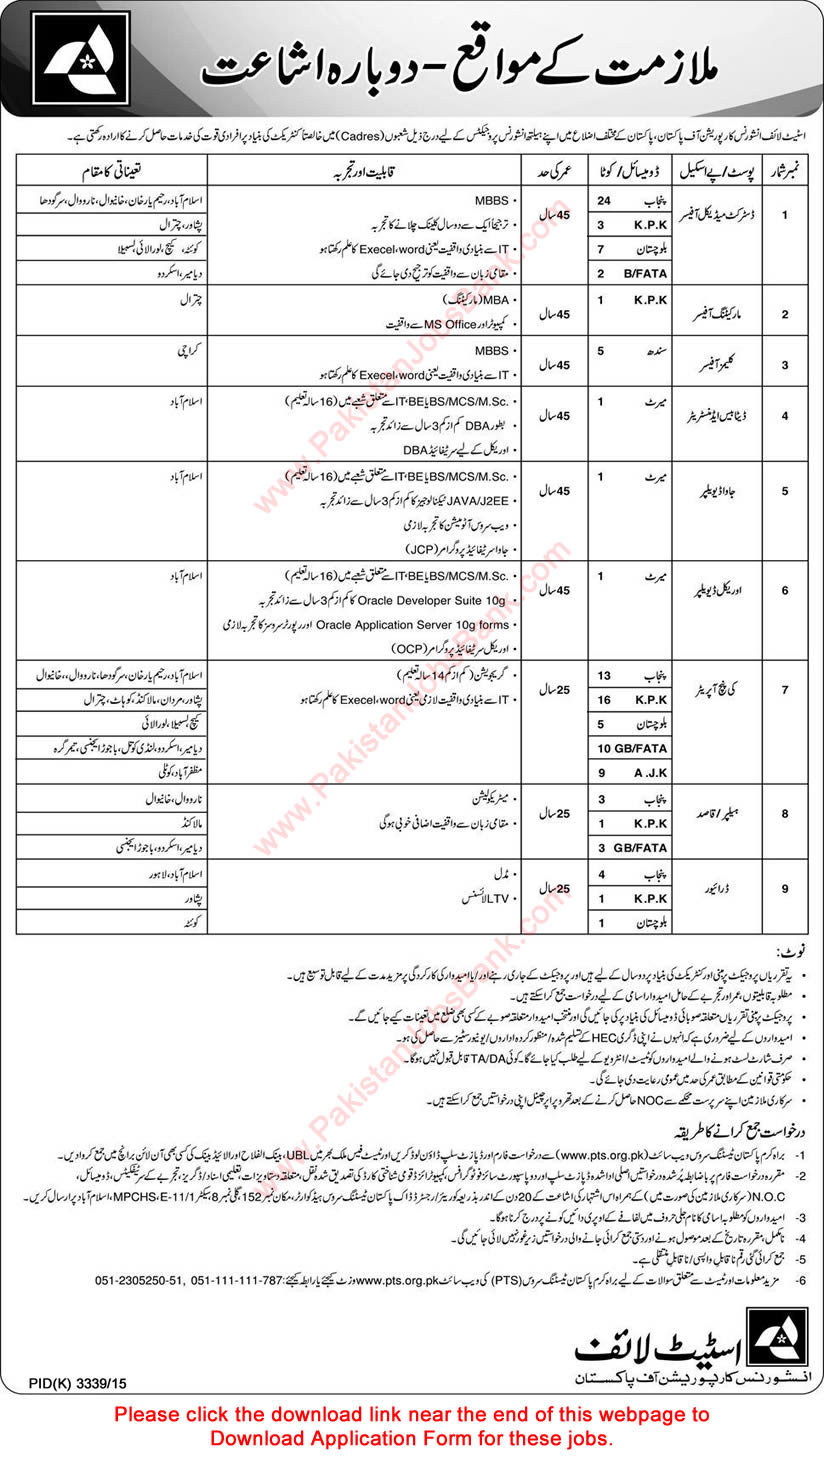 State Life Insurance Corporation of Pakistan Jobs March 2016 KPO, Medical Officers & Others PTS Application Form Latest